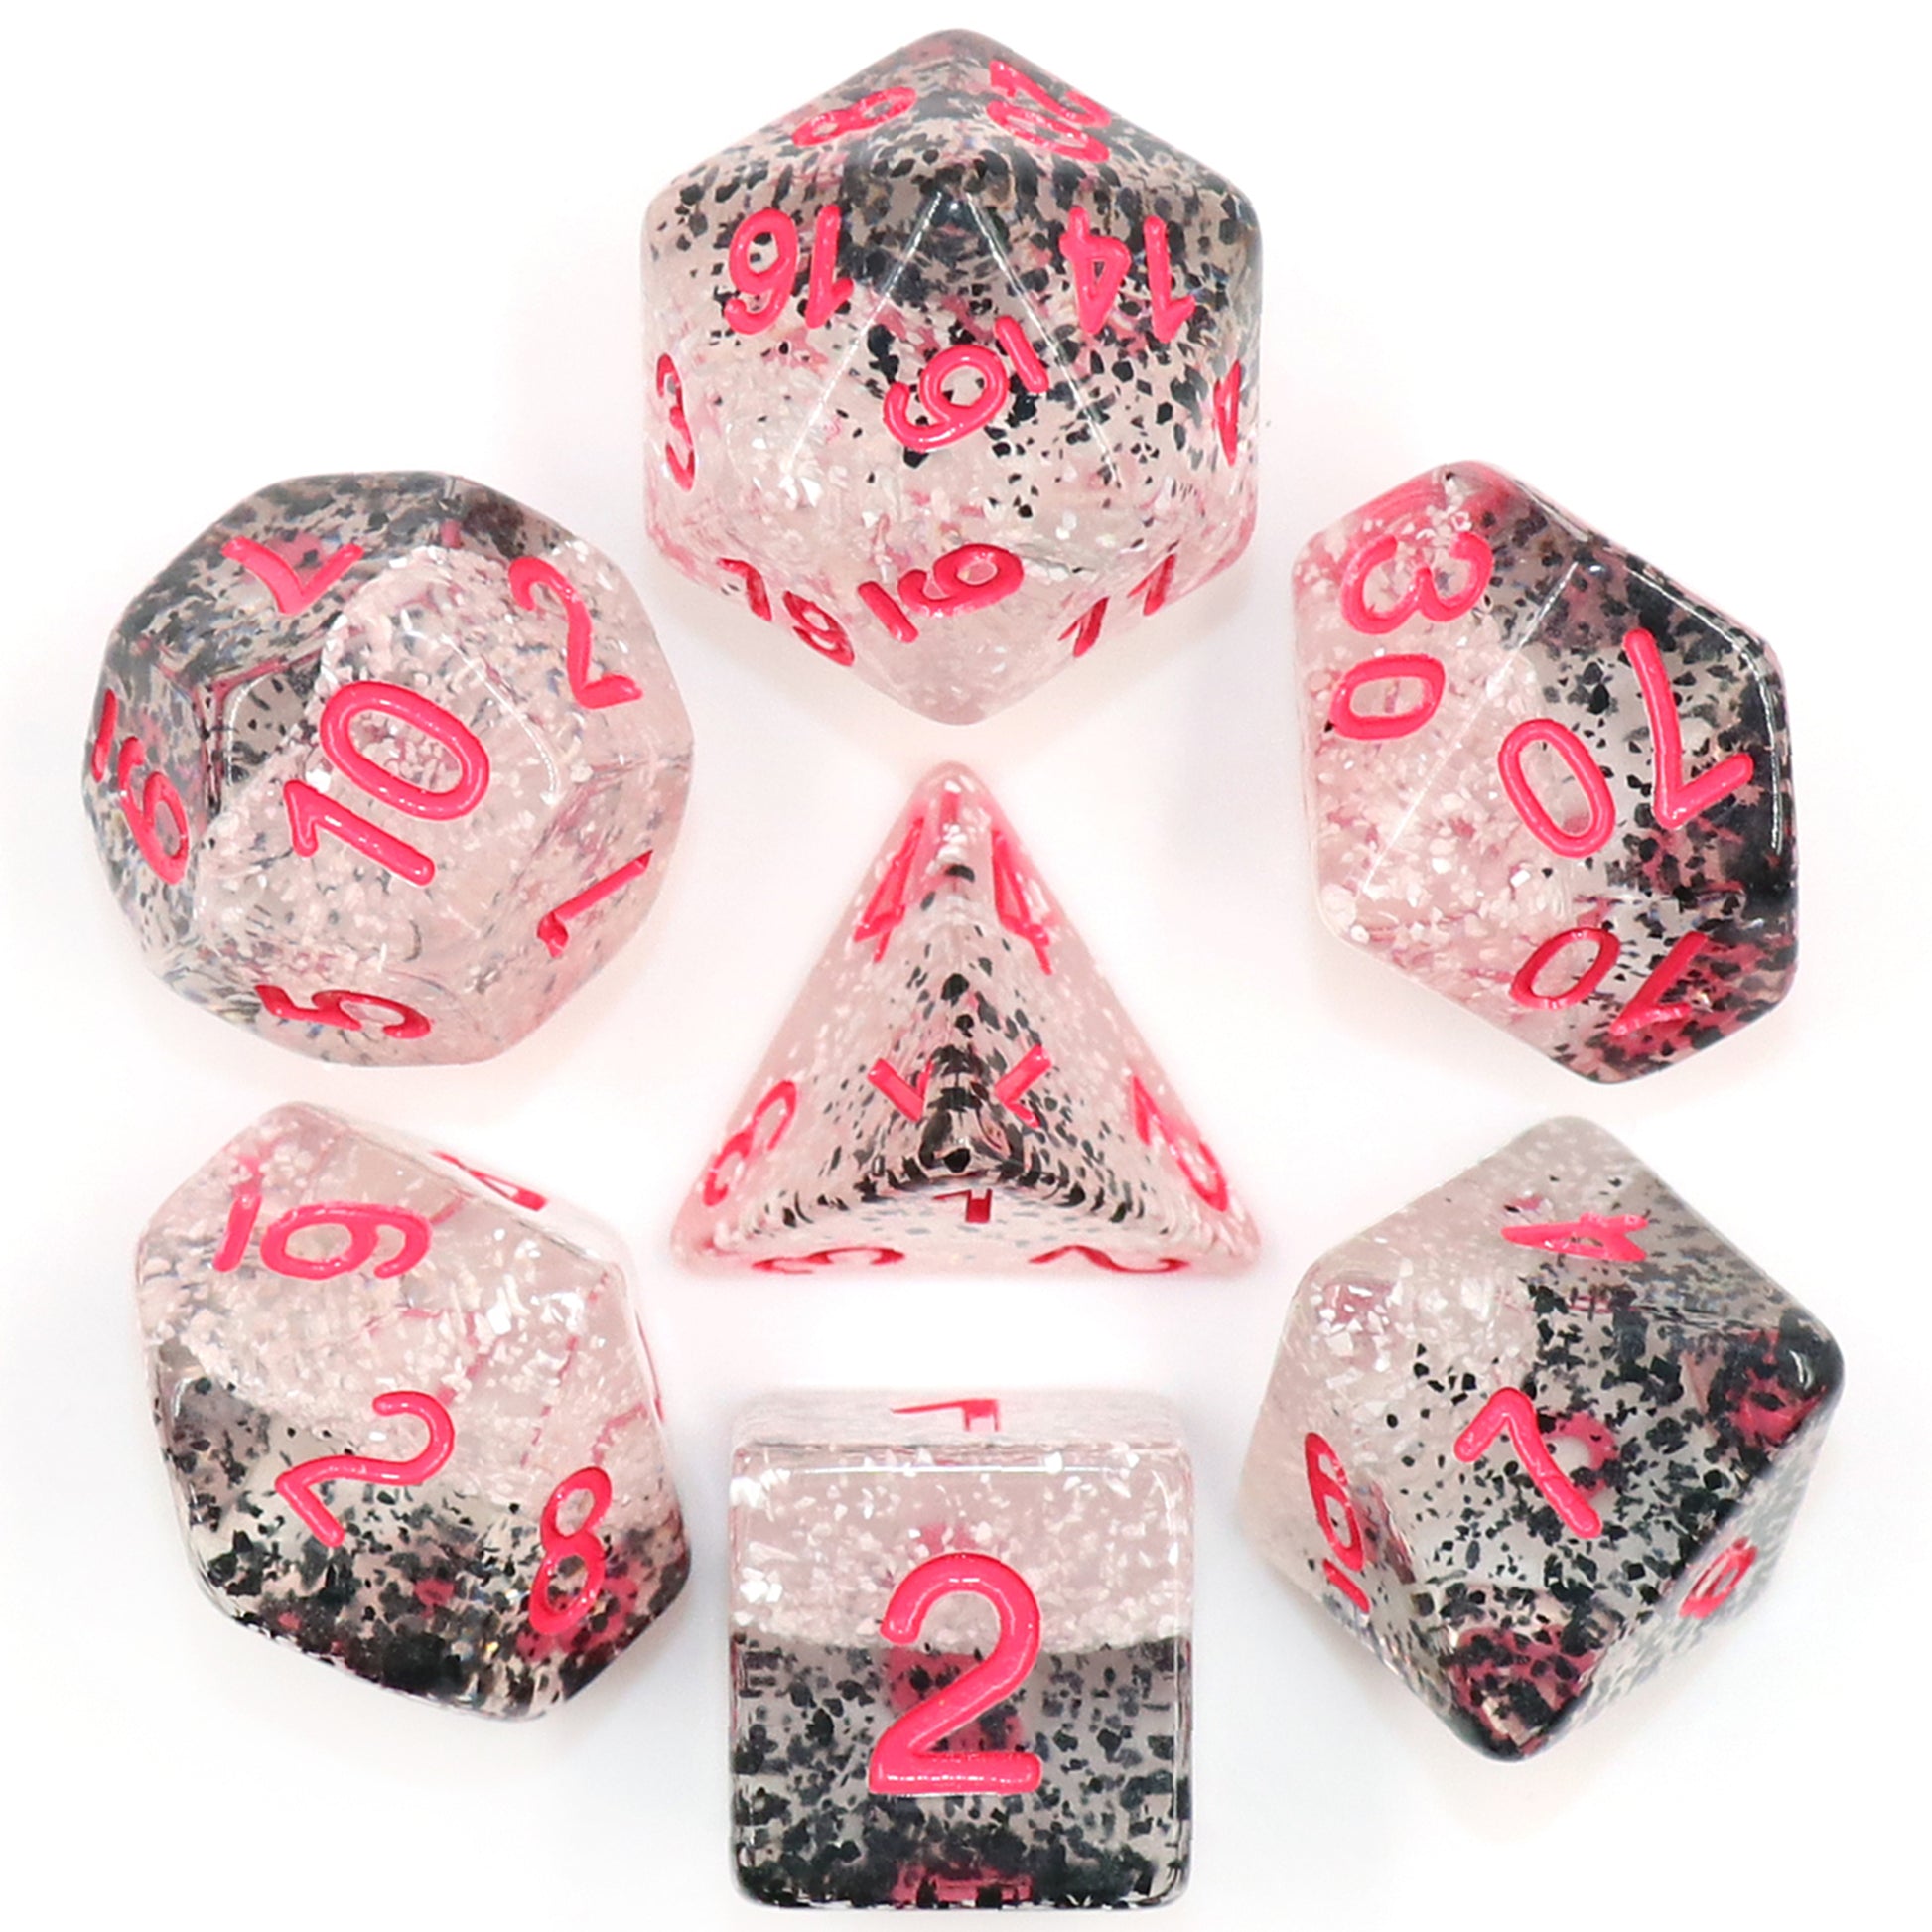 Blood & Ink Poly Dice Set - Chess Player (Black and White Droplets) | Happy Piranha 